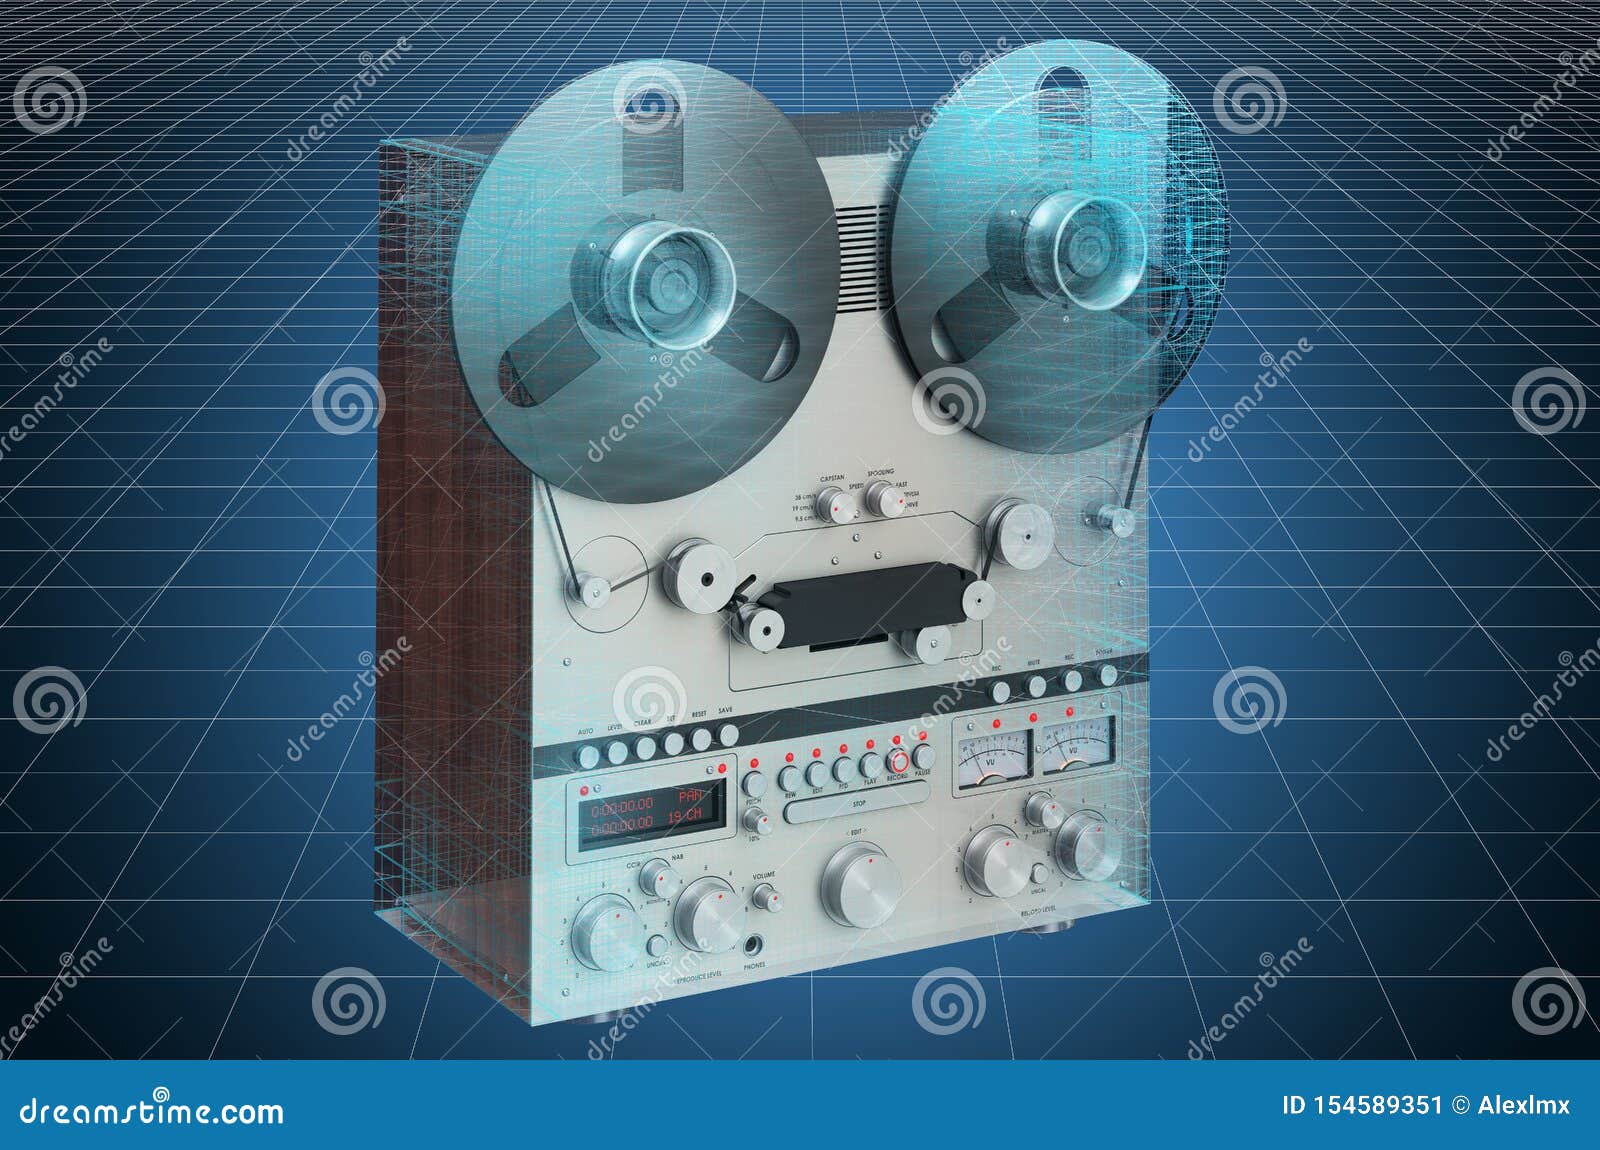 Reel To Reel Tape Machine Stock Illustrations – 56 Reel To Reel Tape  Machine Stock Illustrations, Vectors & Clipart - Dreamstime